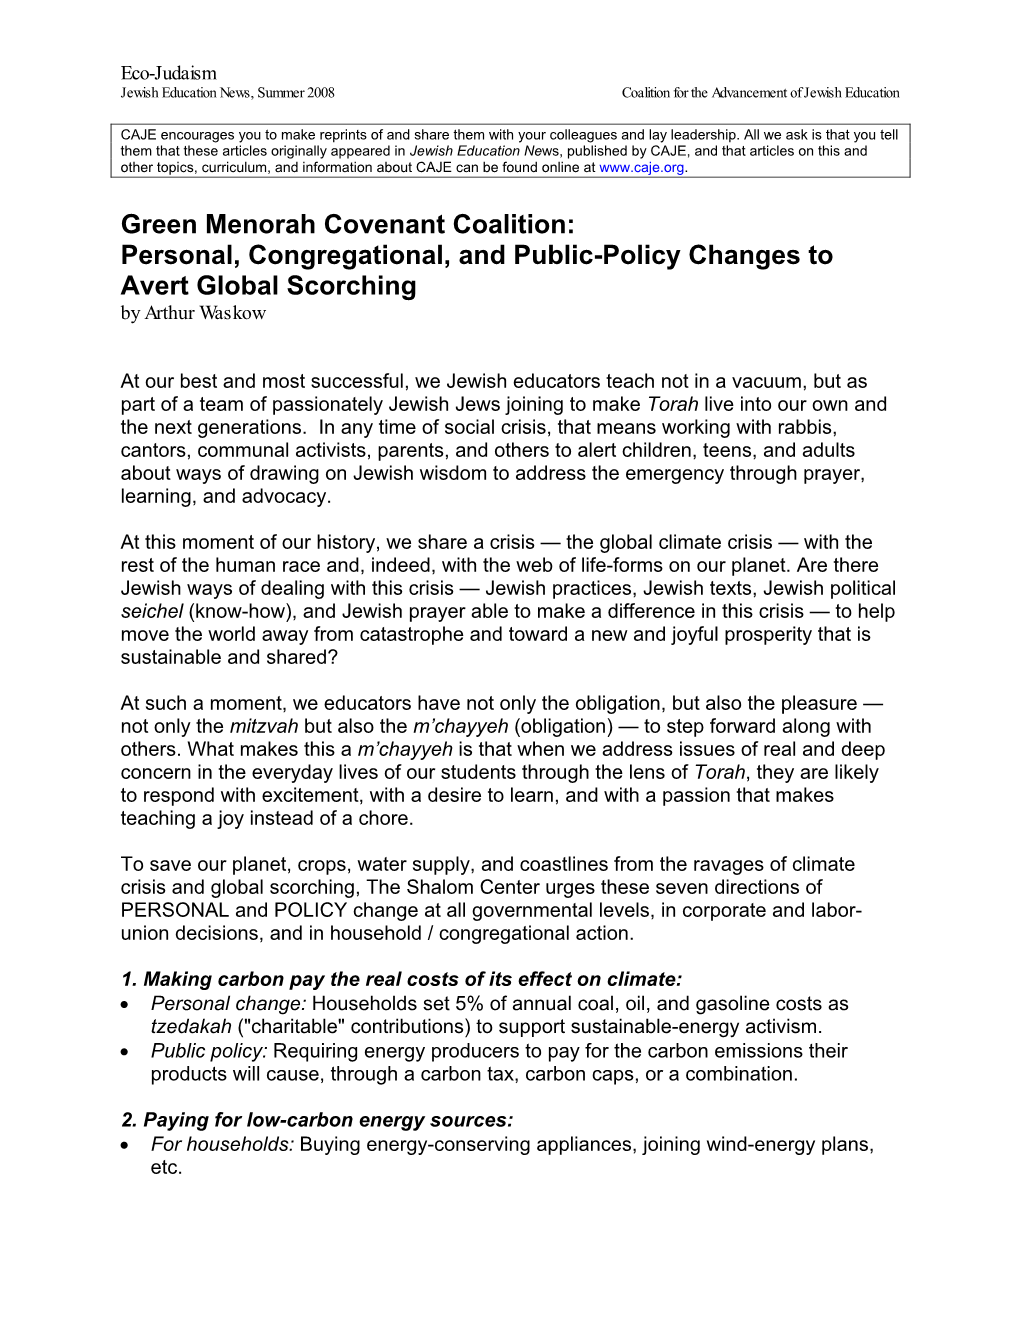 Green Menorah Covenant Coalition: Personal, Congregational, and Public-Policy Changes to Avert Global Scorching by Arthur Waskow